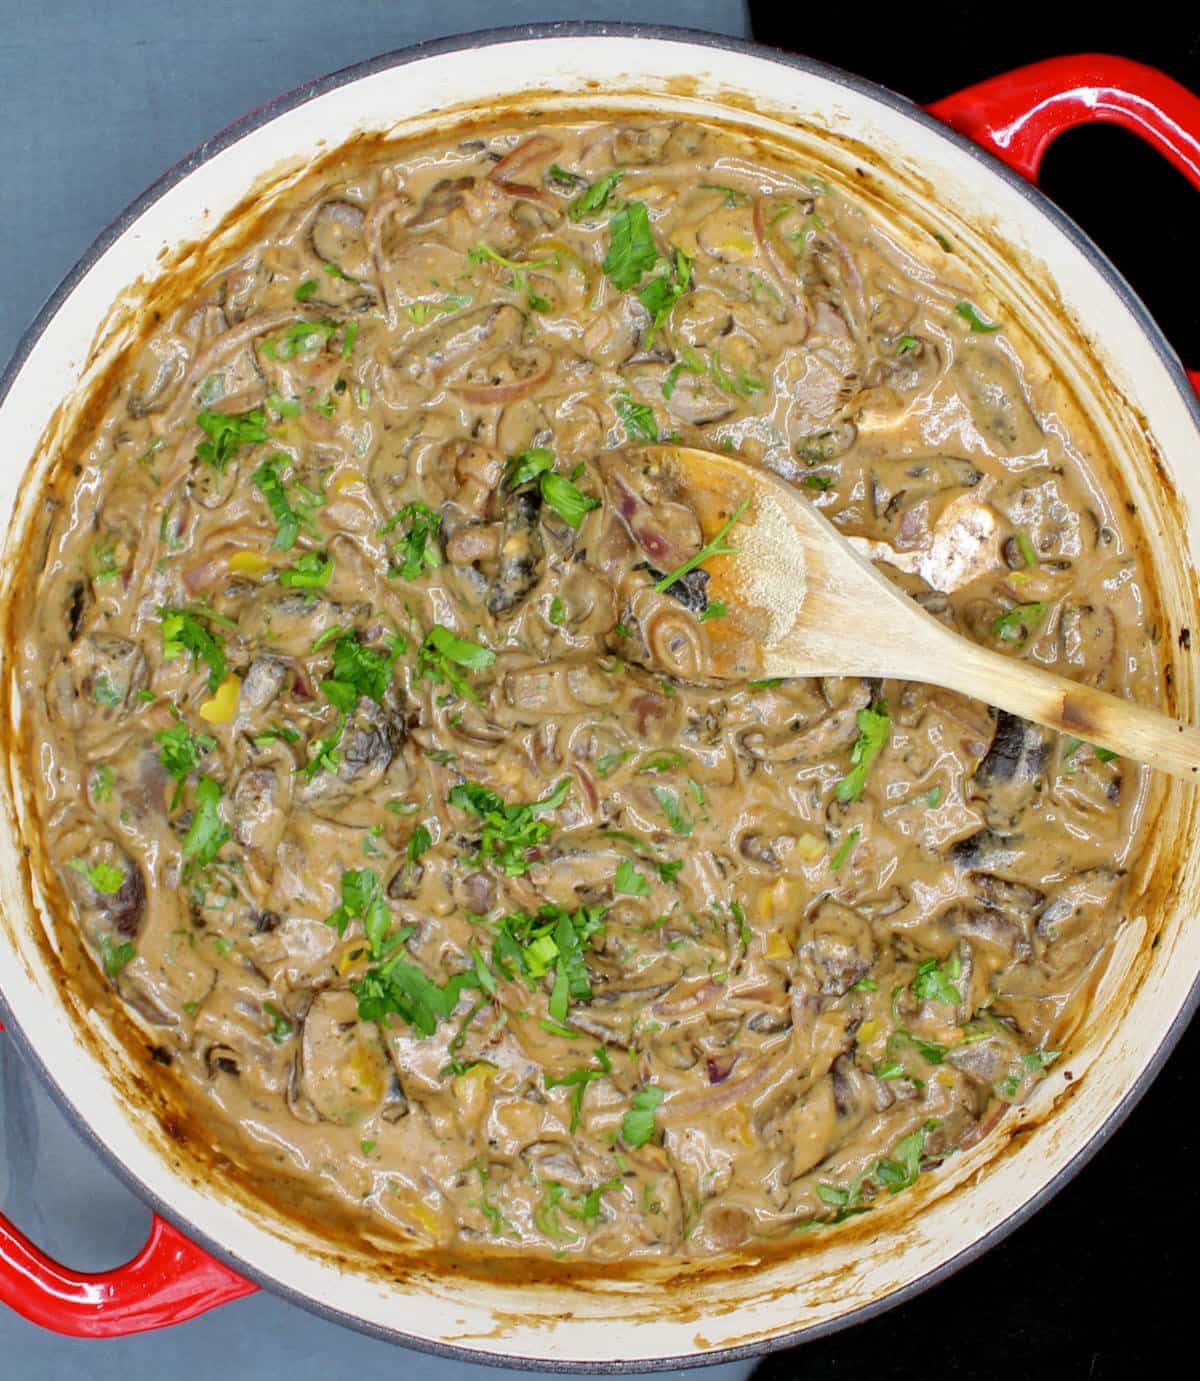 Vegan mushroom stroganoff in red and white skillet with wooden ladle.